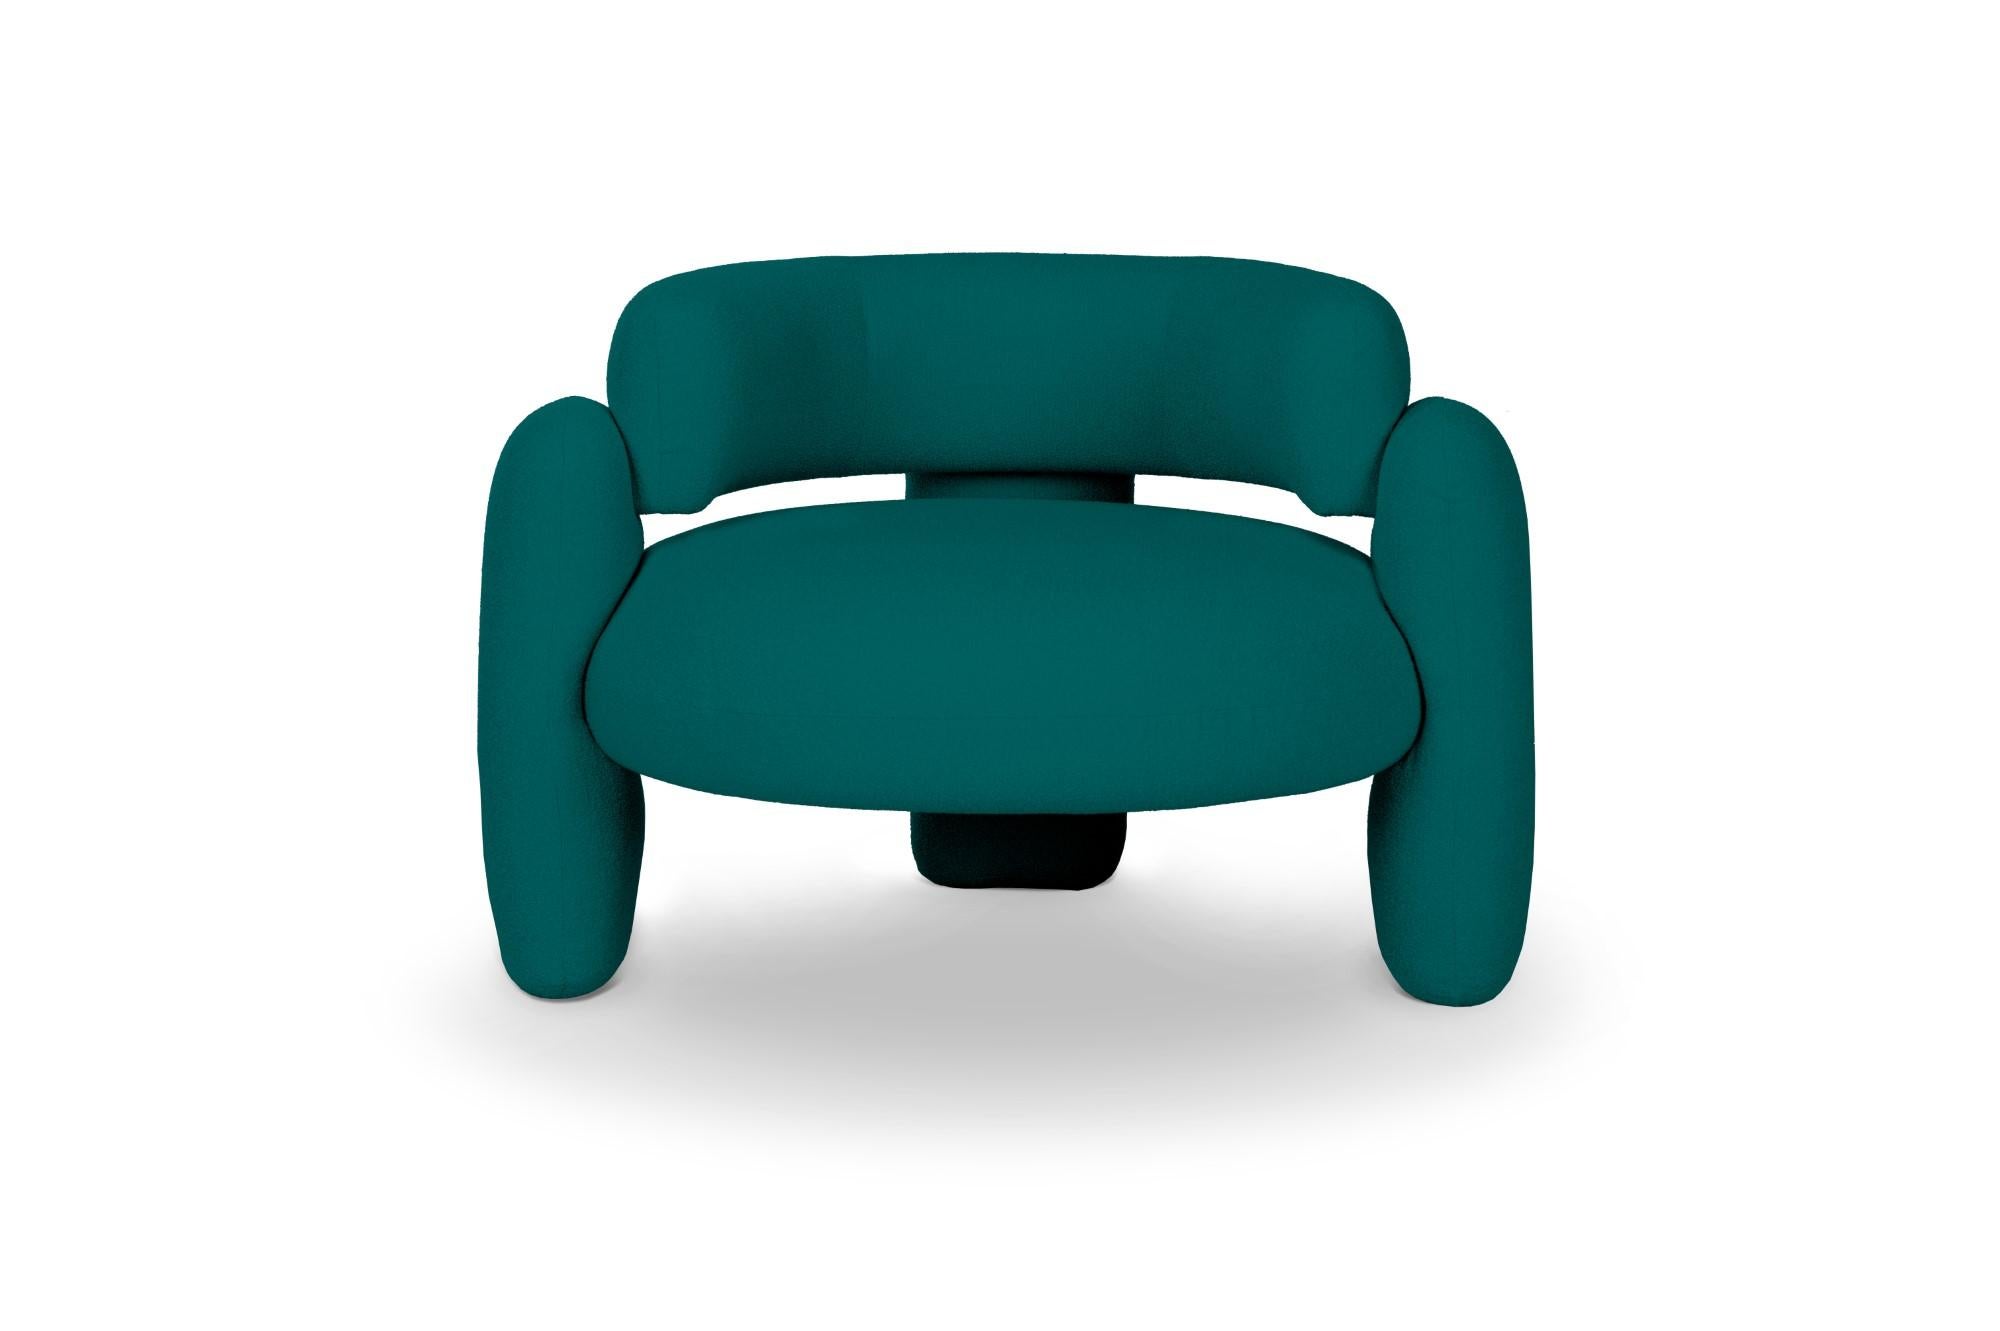 Embrace Lago Canard armchair by Royal Stranger 
Dimensions: W 96 x D 85 x H 68 cm.
Different upholstery colors and finishes are available. 
Materials: Upholstery.

Featuring an enfolding composition of geometrical shapes, the Embrace Armchair